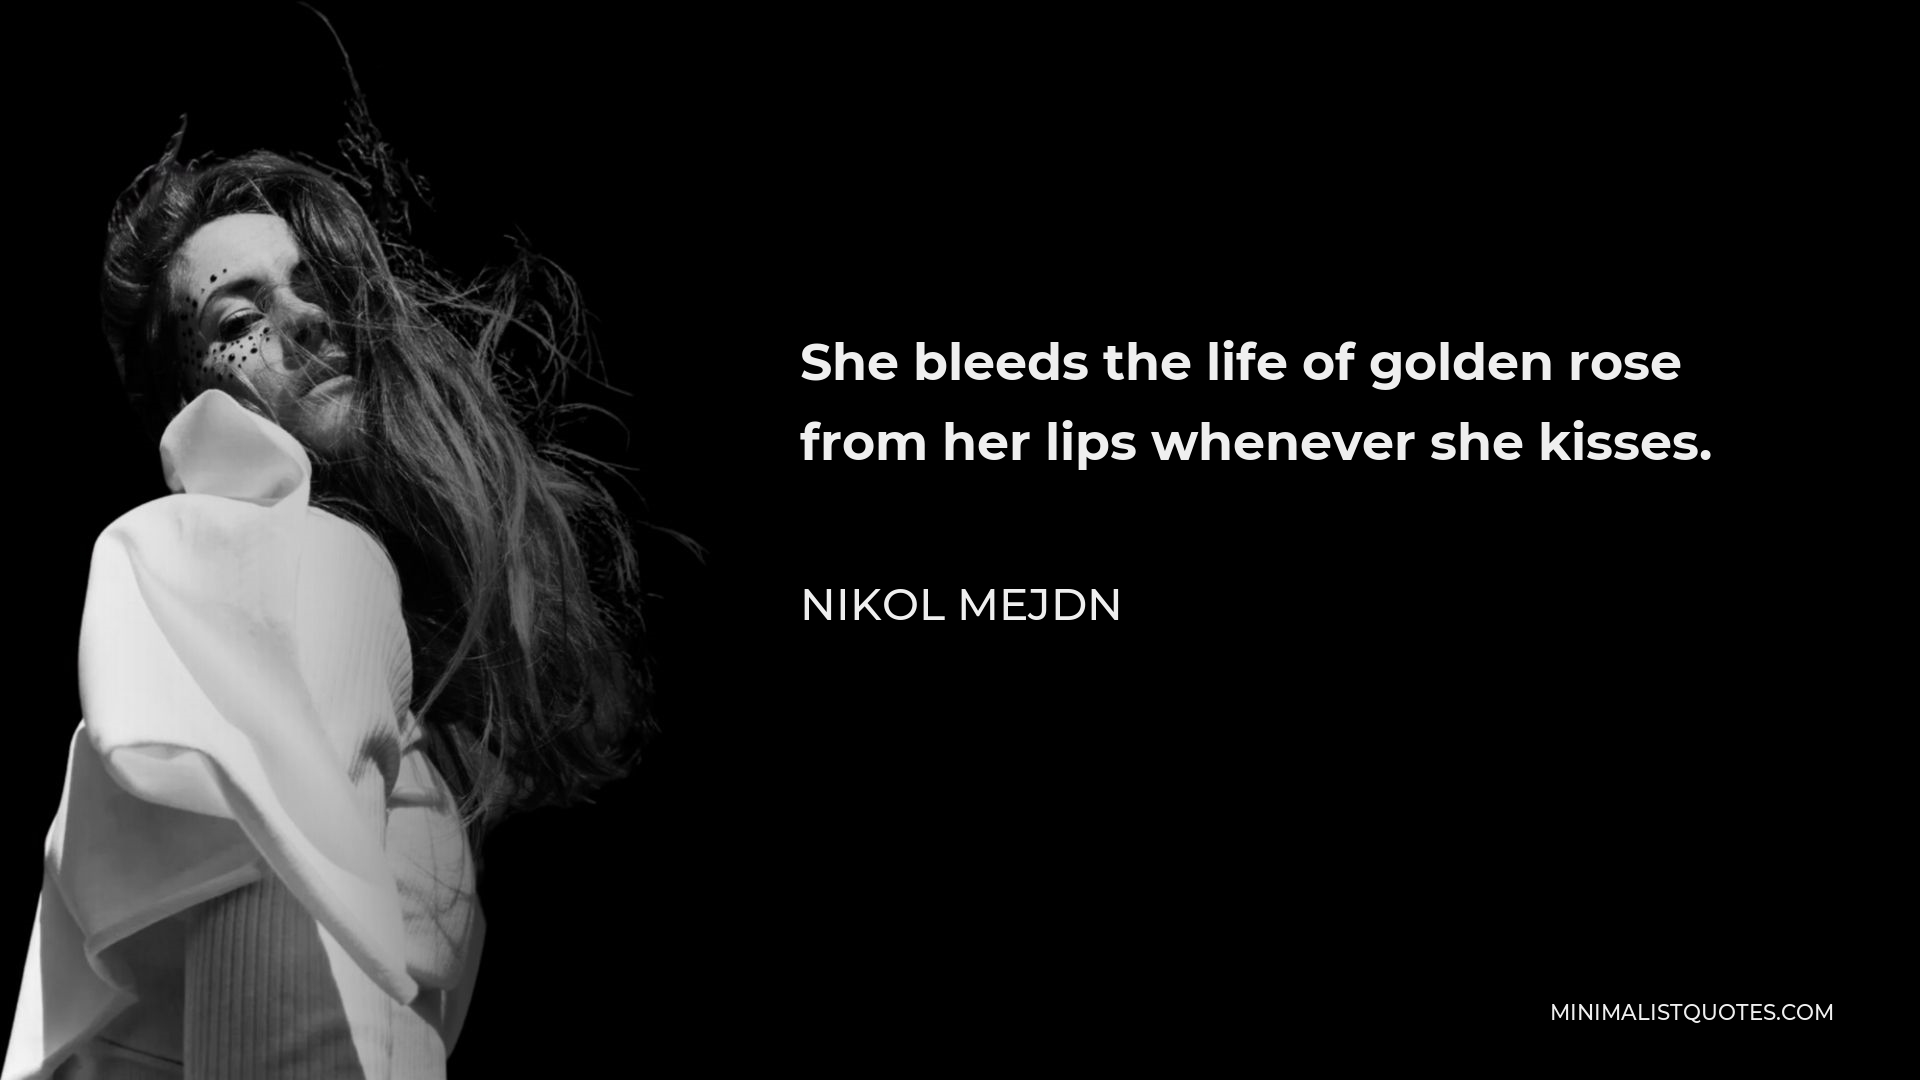 Nikol Mejdn Quote - She bleeds the life of golden rose from her lips whenever she kisses.